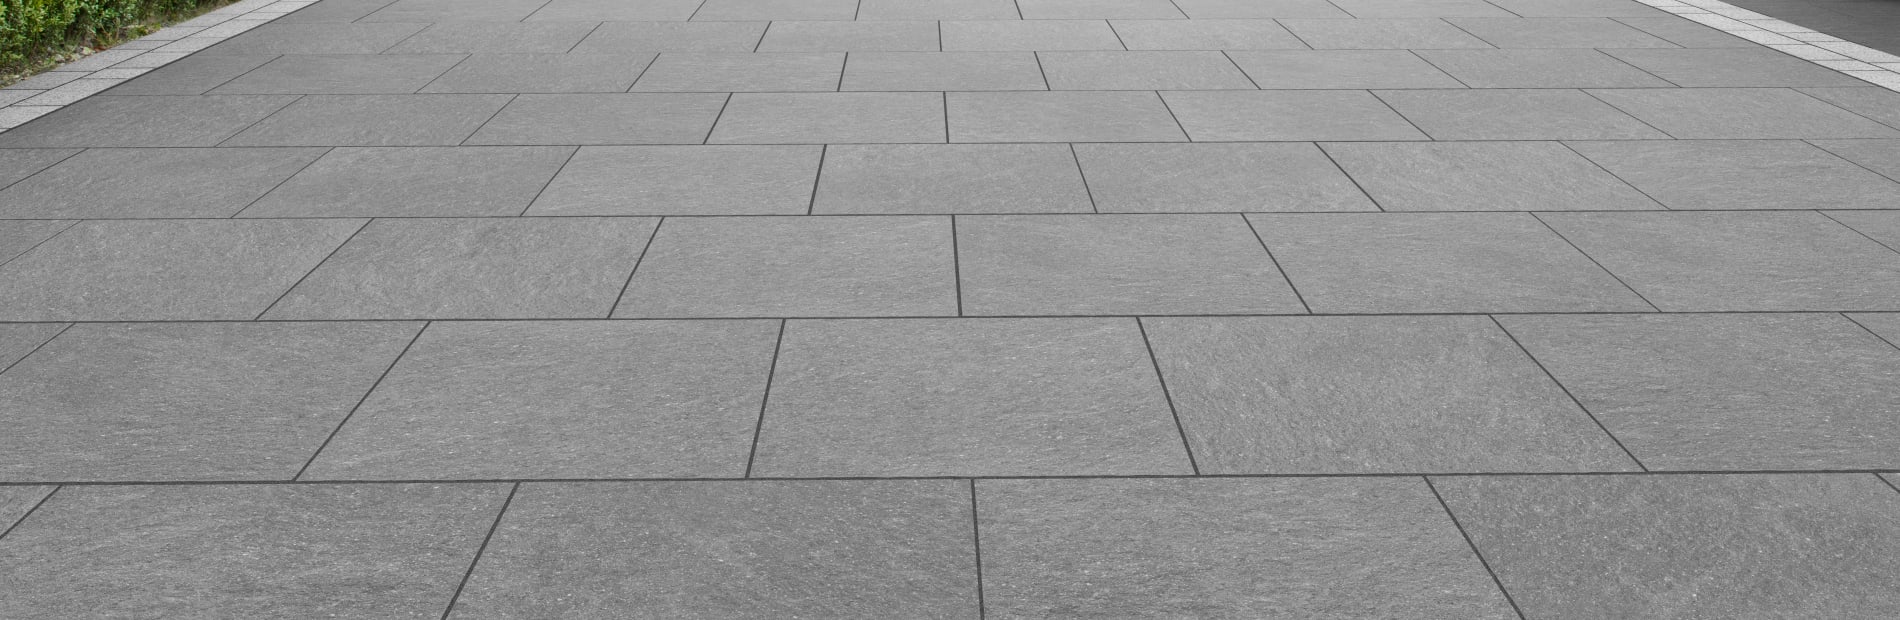 Tempo Crafted driveway paving in carbon